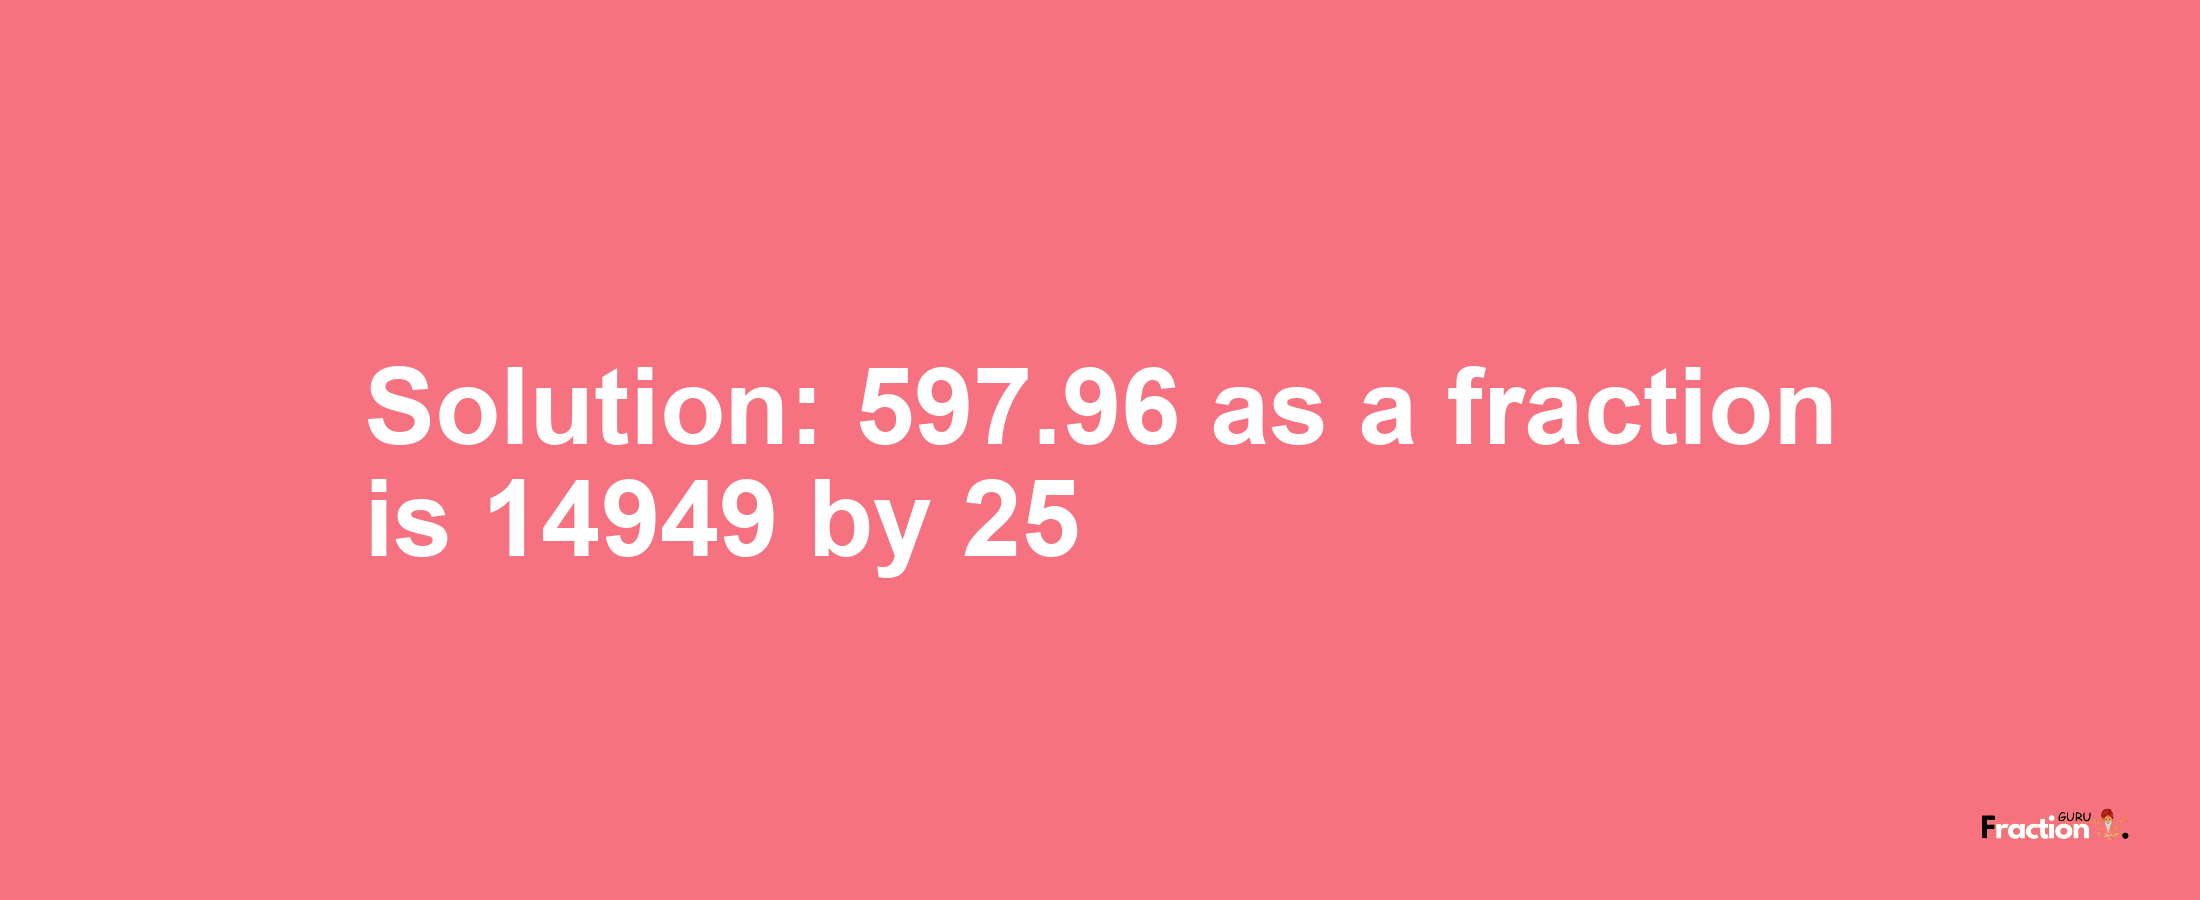 Solution:597.96 as a fraction is 14949/25